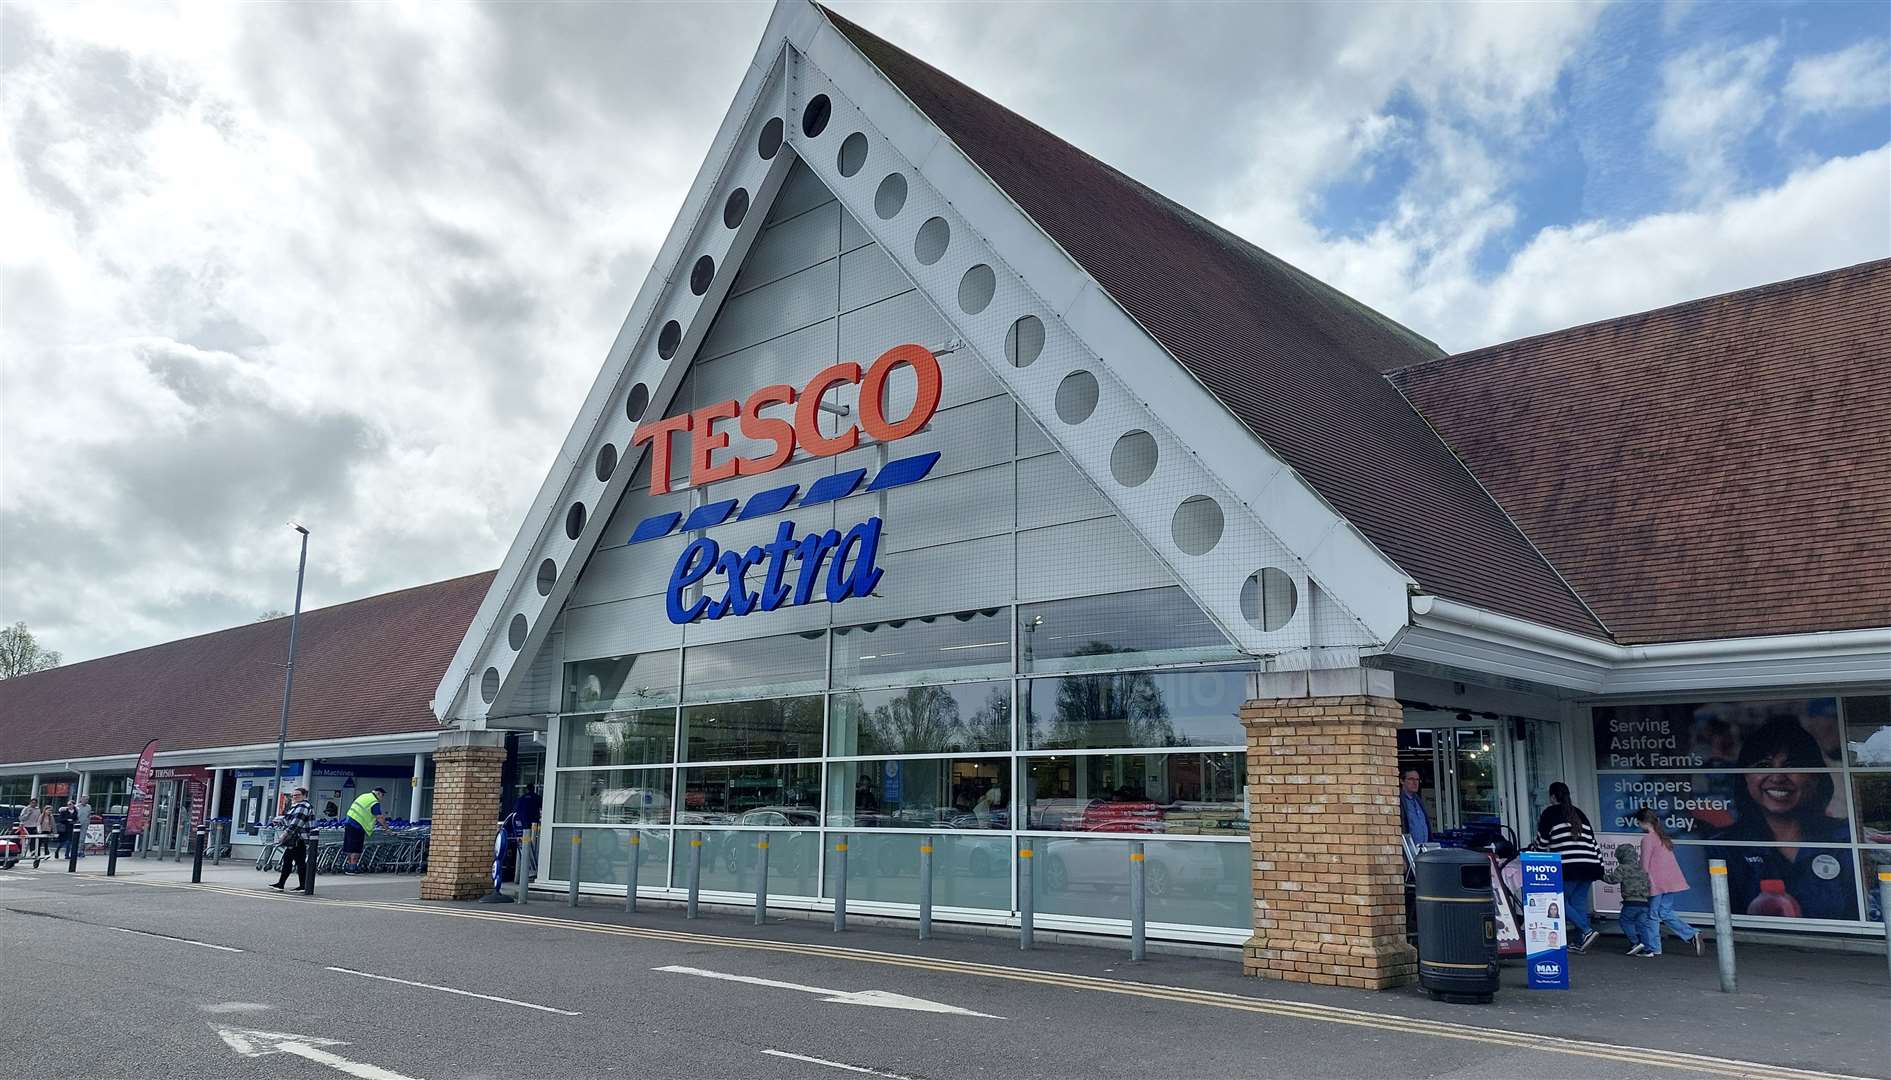 Park Farm Tesco in Ashford is the latest supermarket to offer IKEA click and collect